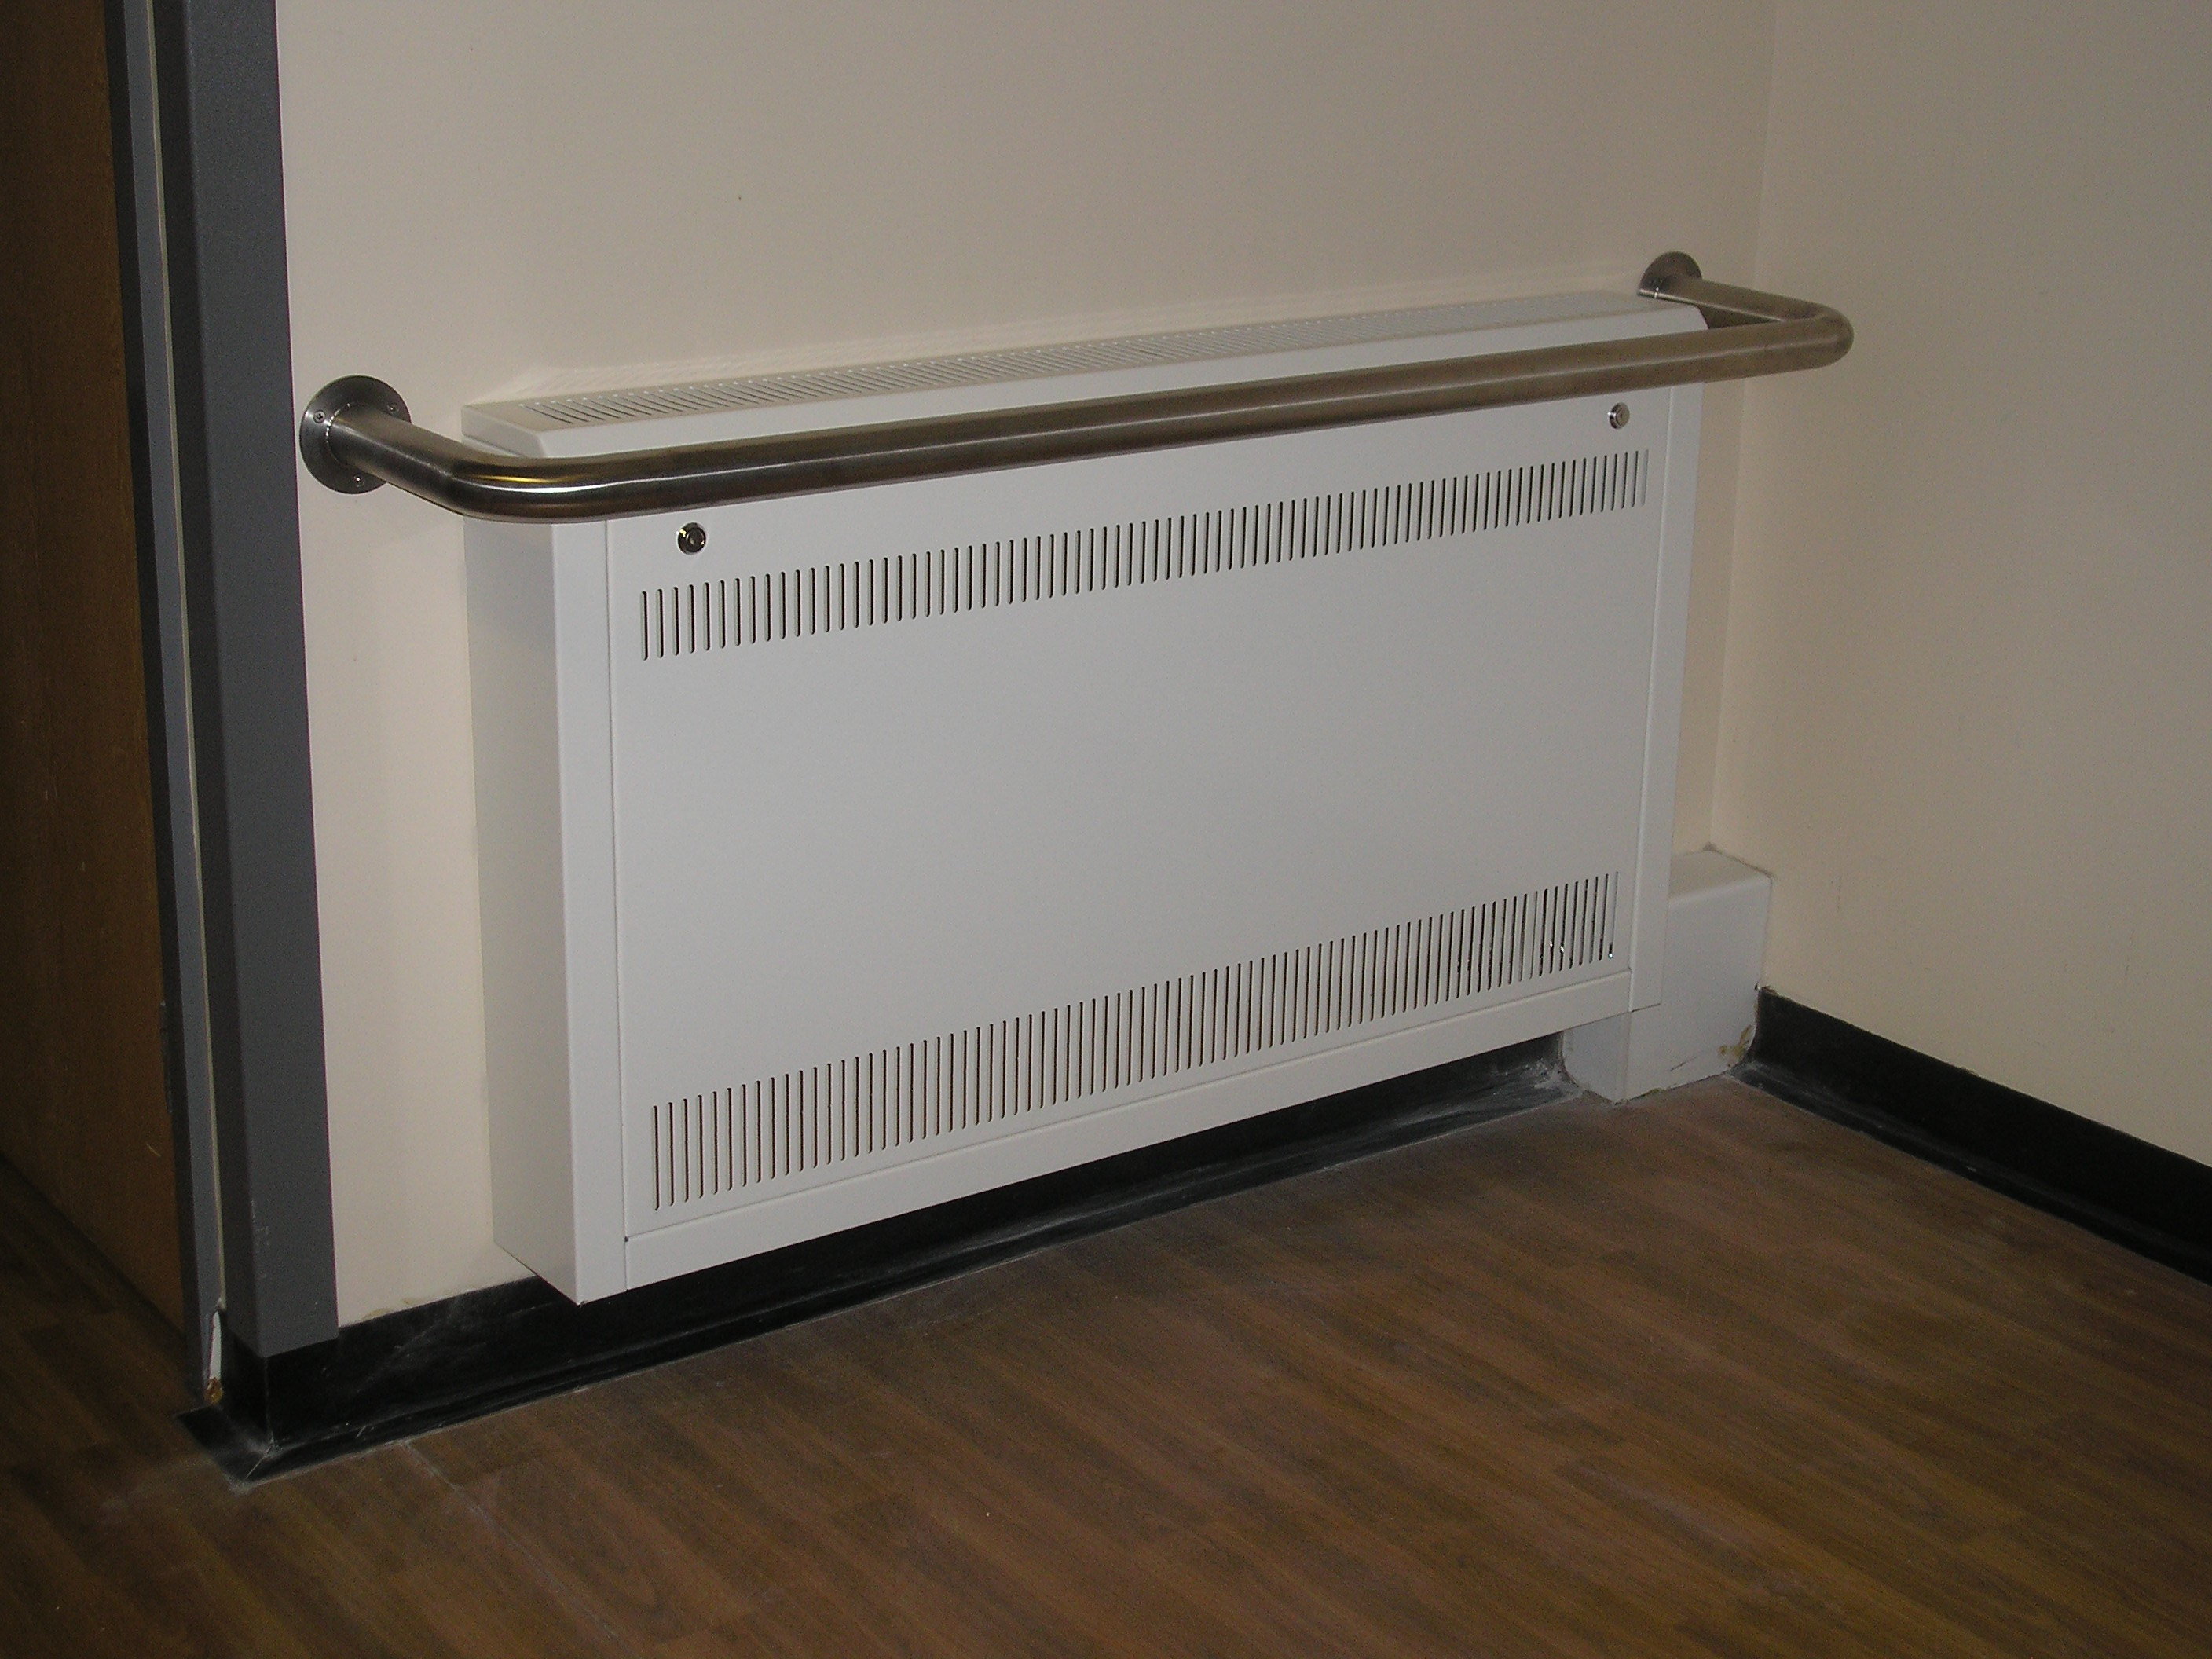 bespoke lst radiator guards with lean bars